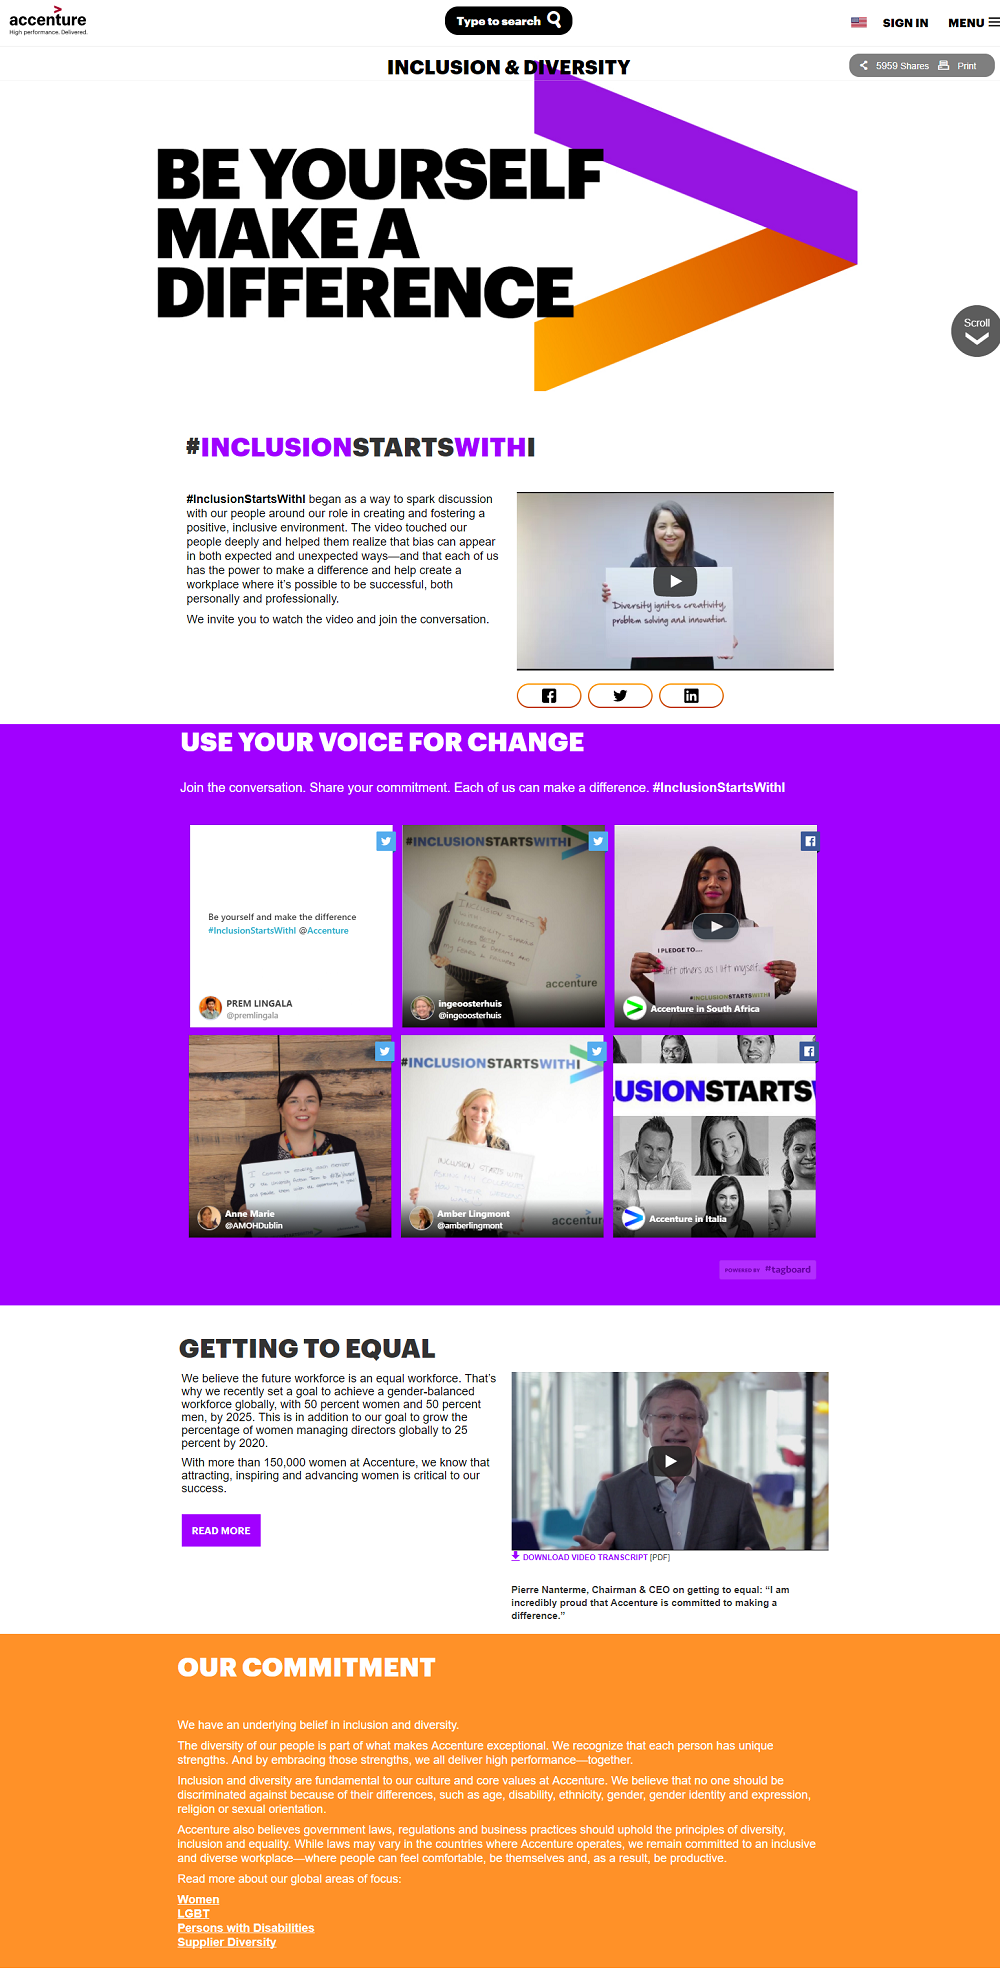 Accenture Company Diversity Page